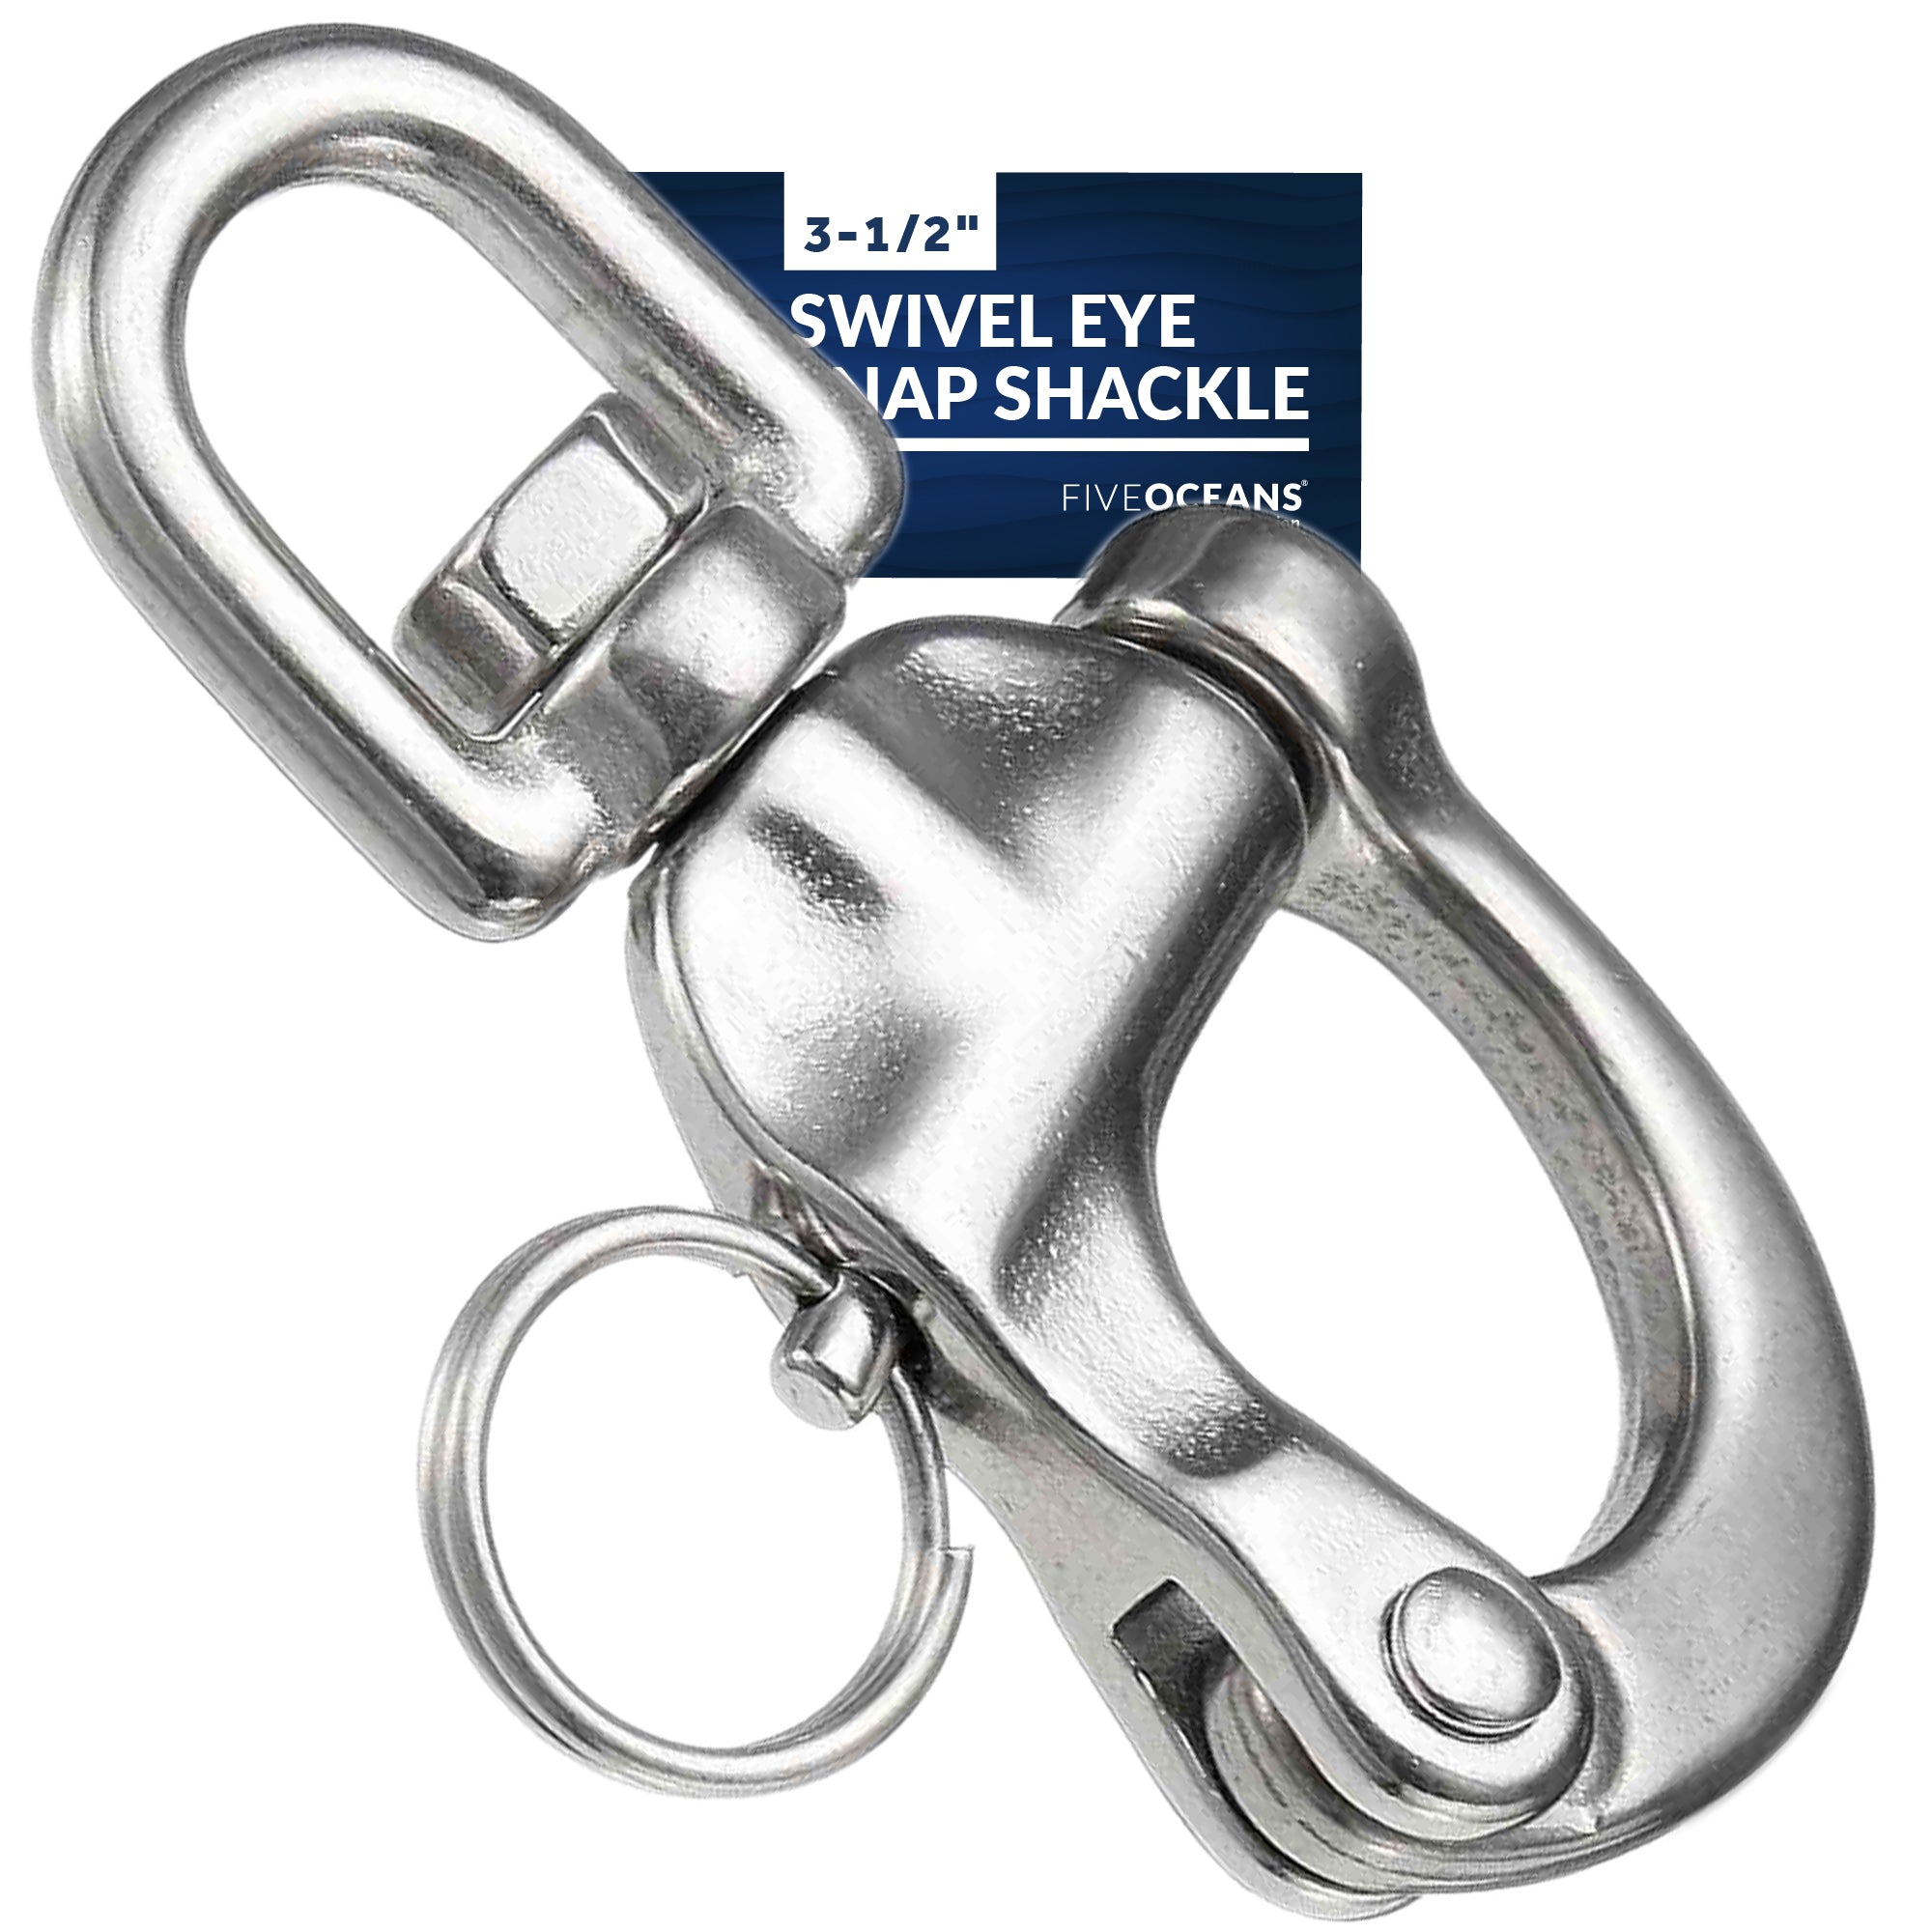 Swivel Eye Snap Shackle Quick Release Bail Rigging, 3 1/2 Stainless S